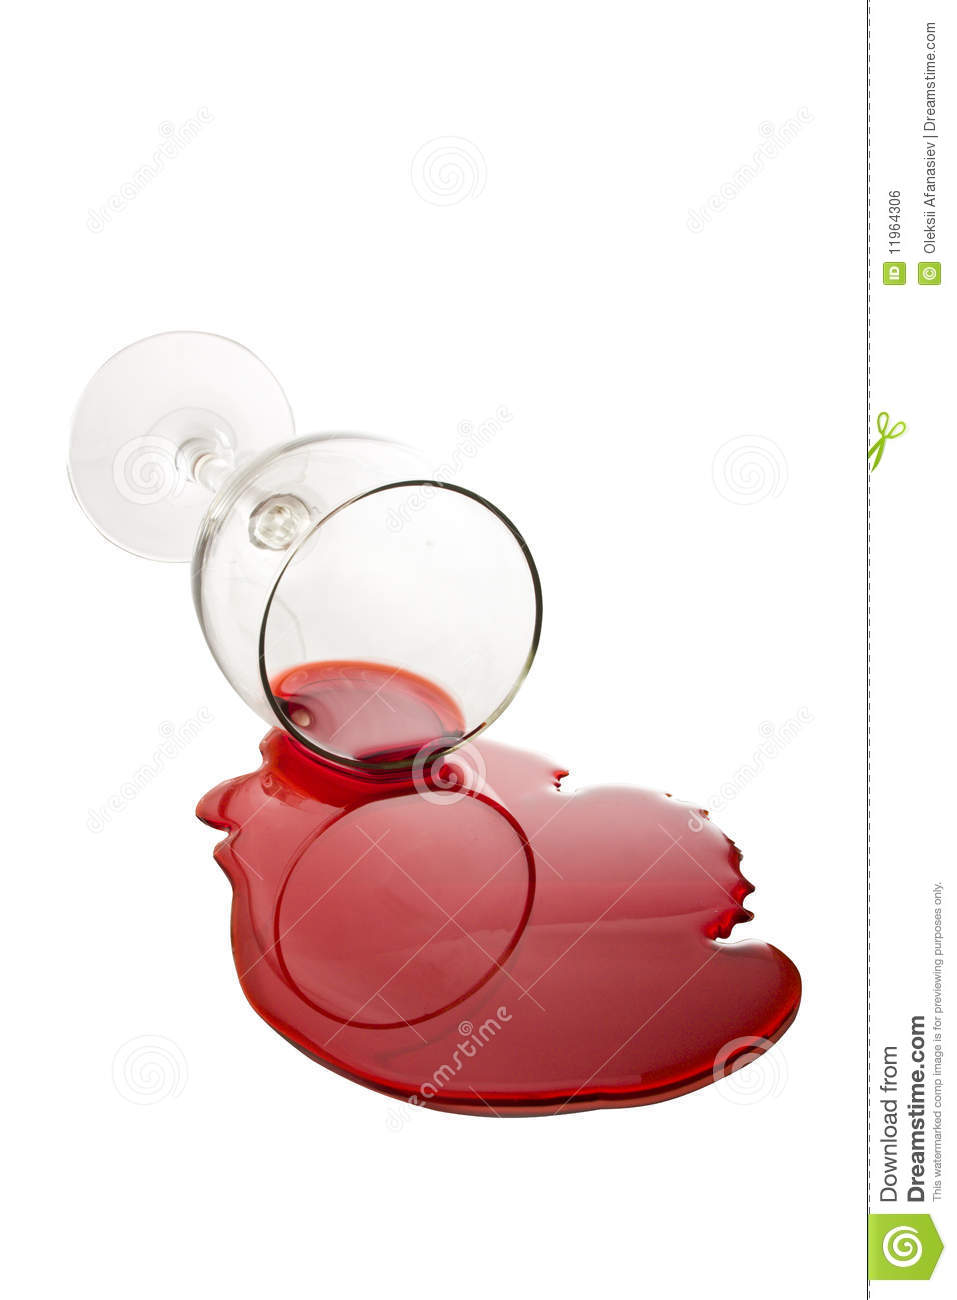 Spilled Wine Glass Royalty Free Stock Image   Image  11964306